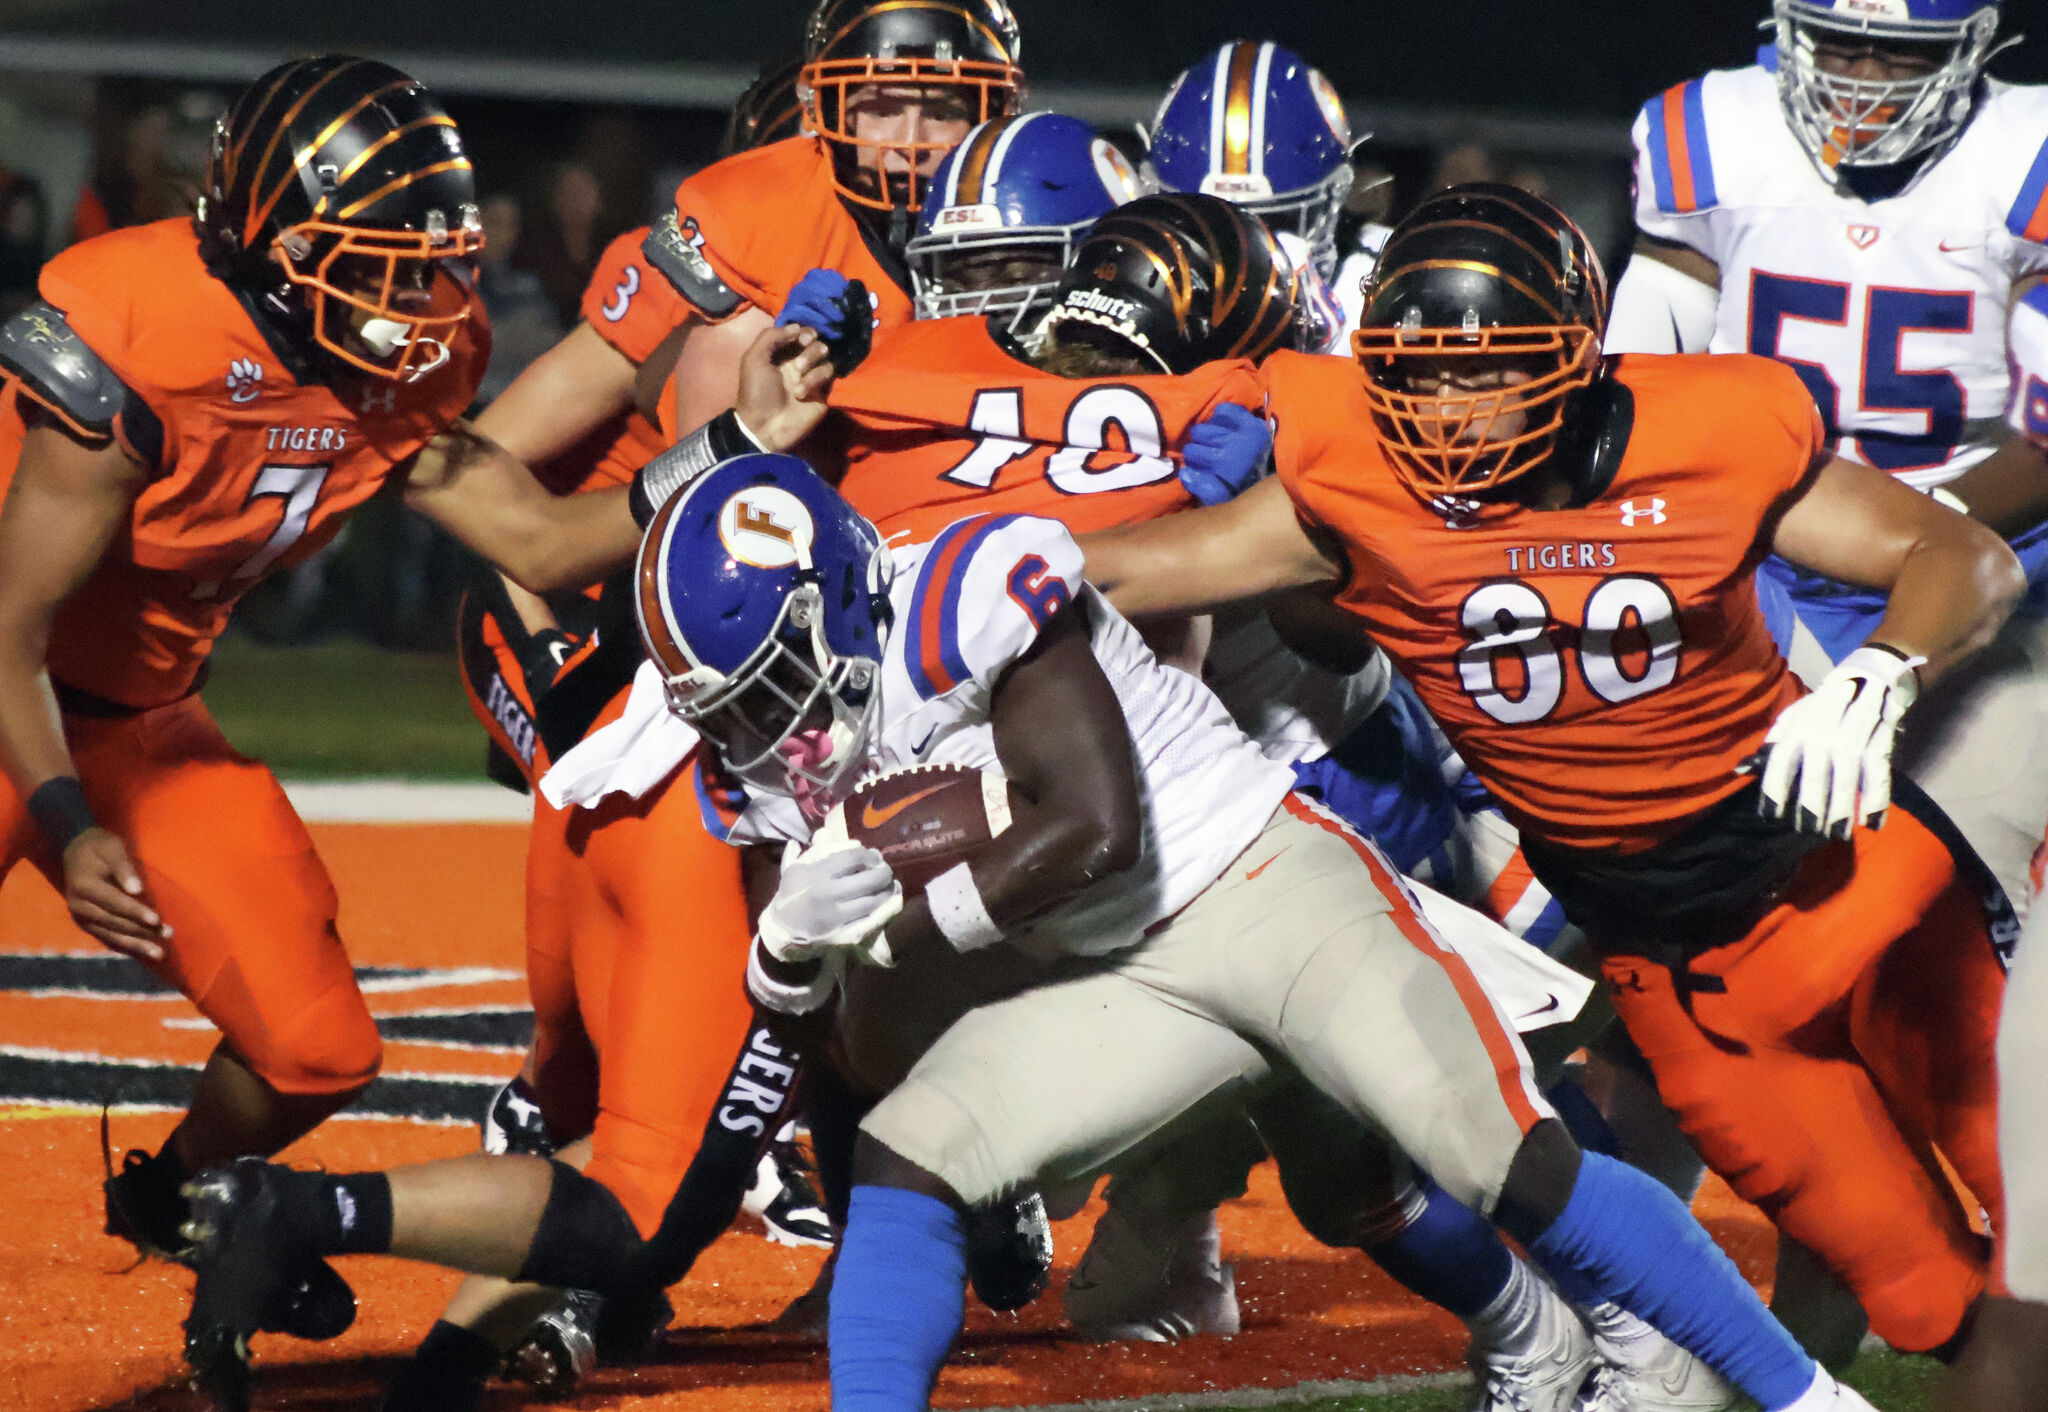 East St. Louis uses defensive muscle to beat Edwardsville and